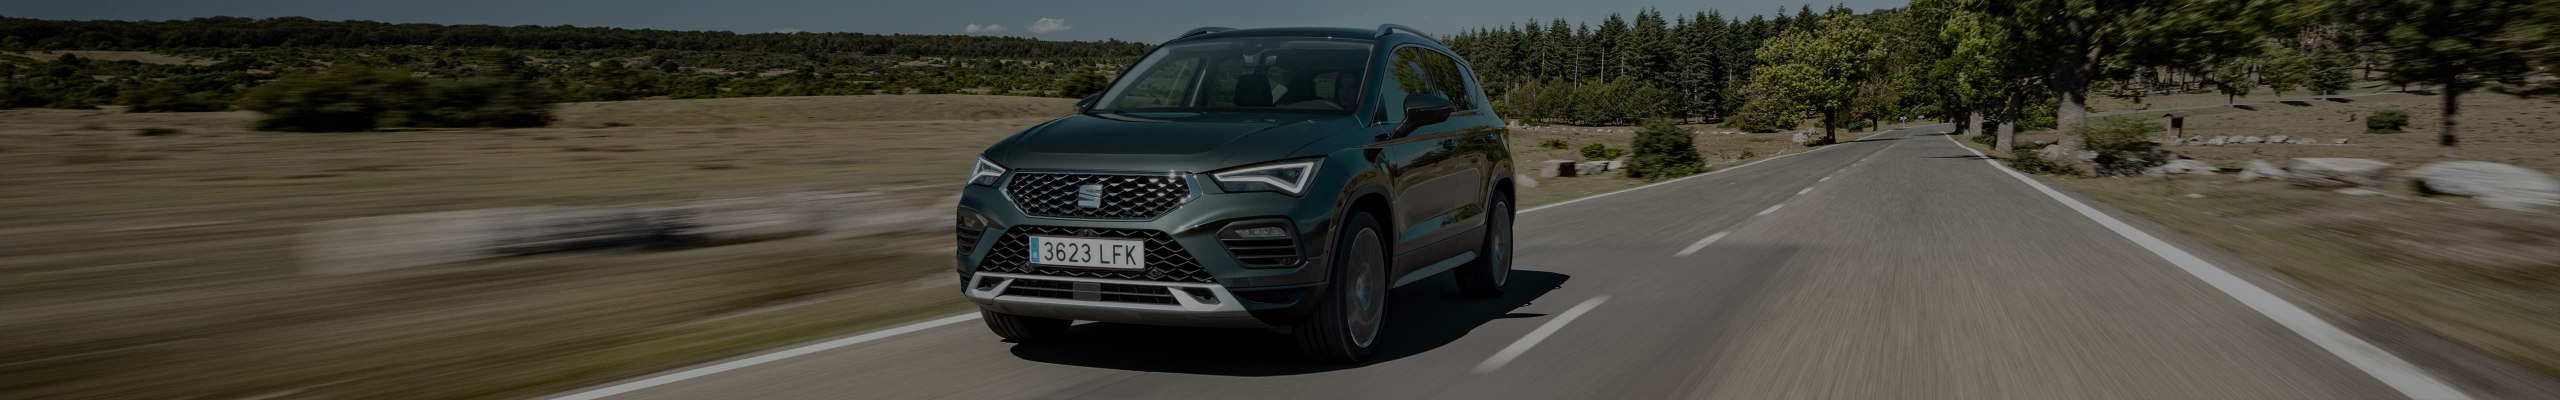 grey SEAT Ateca driving on country road